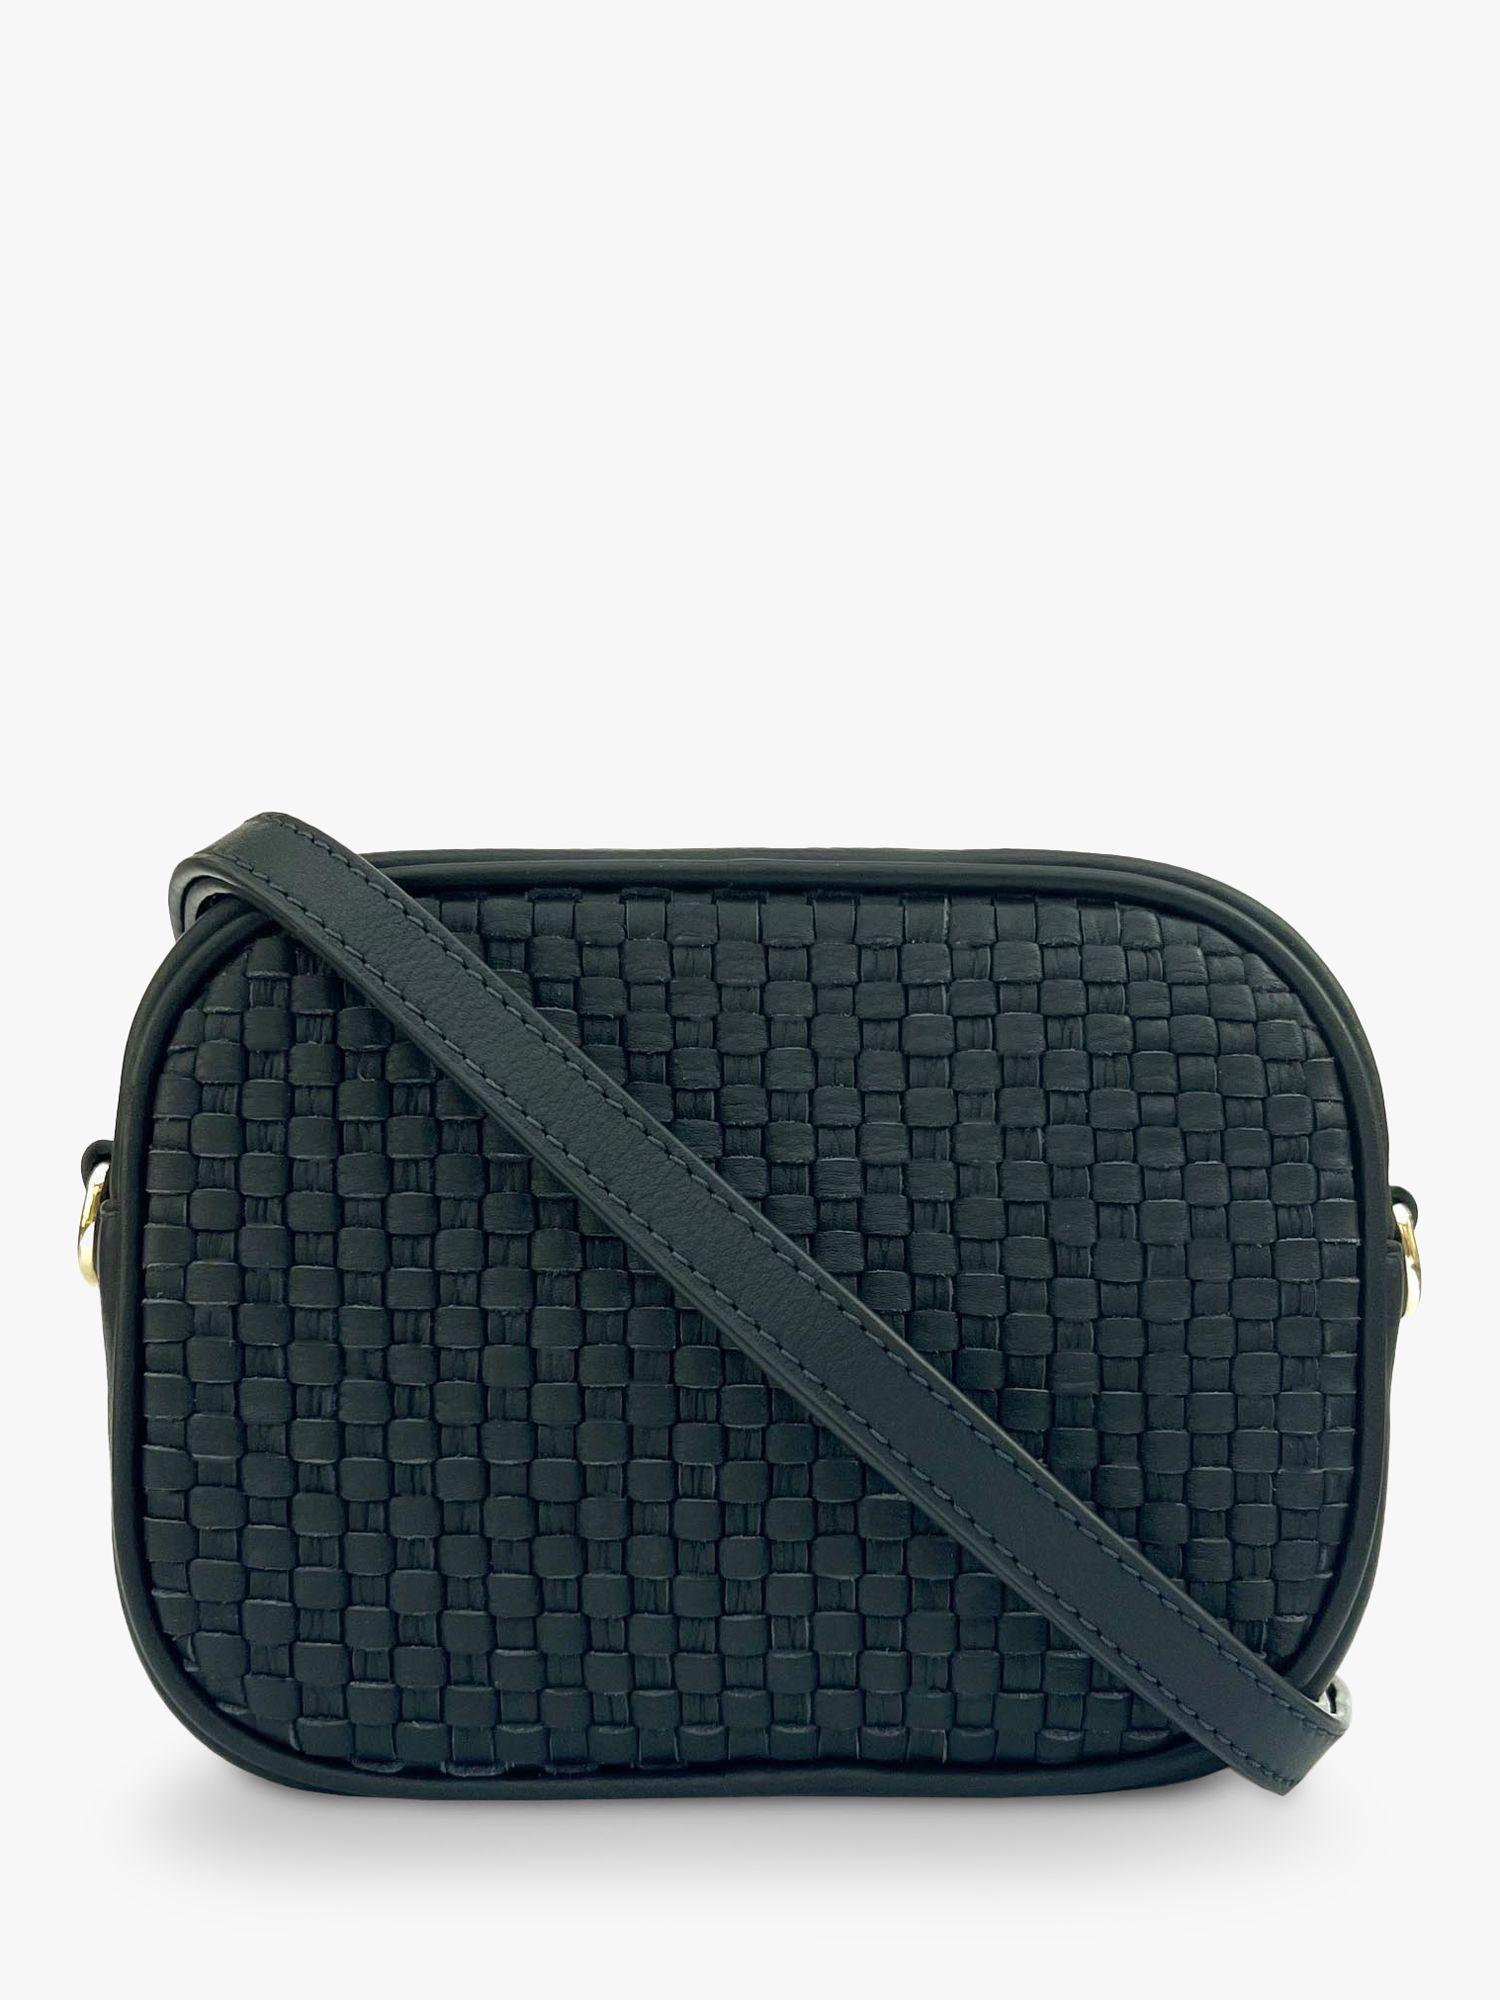 Apatchy The Penelope Woven Leather Camera Bag, Black